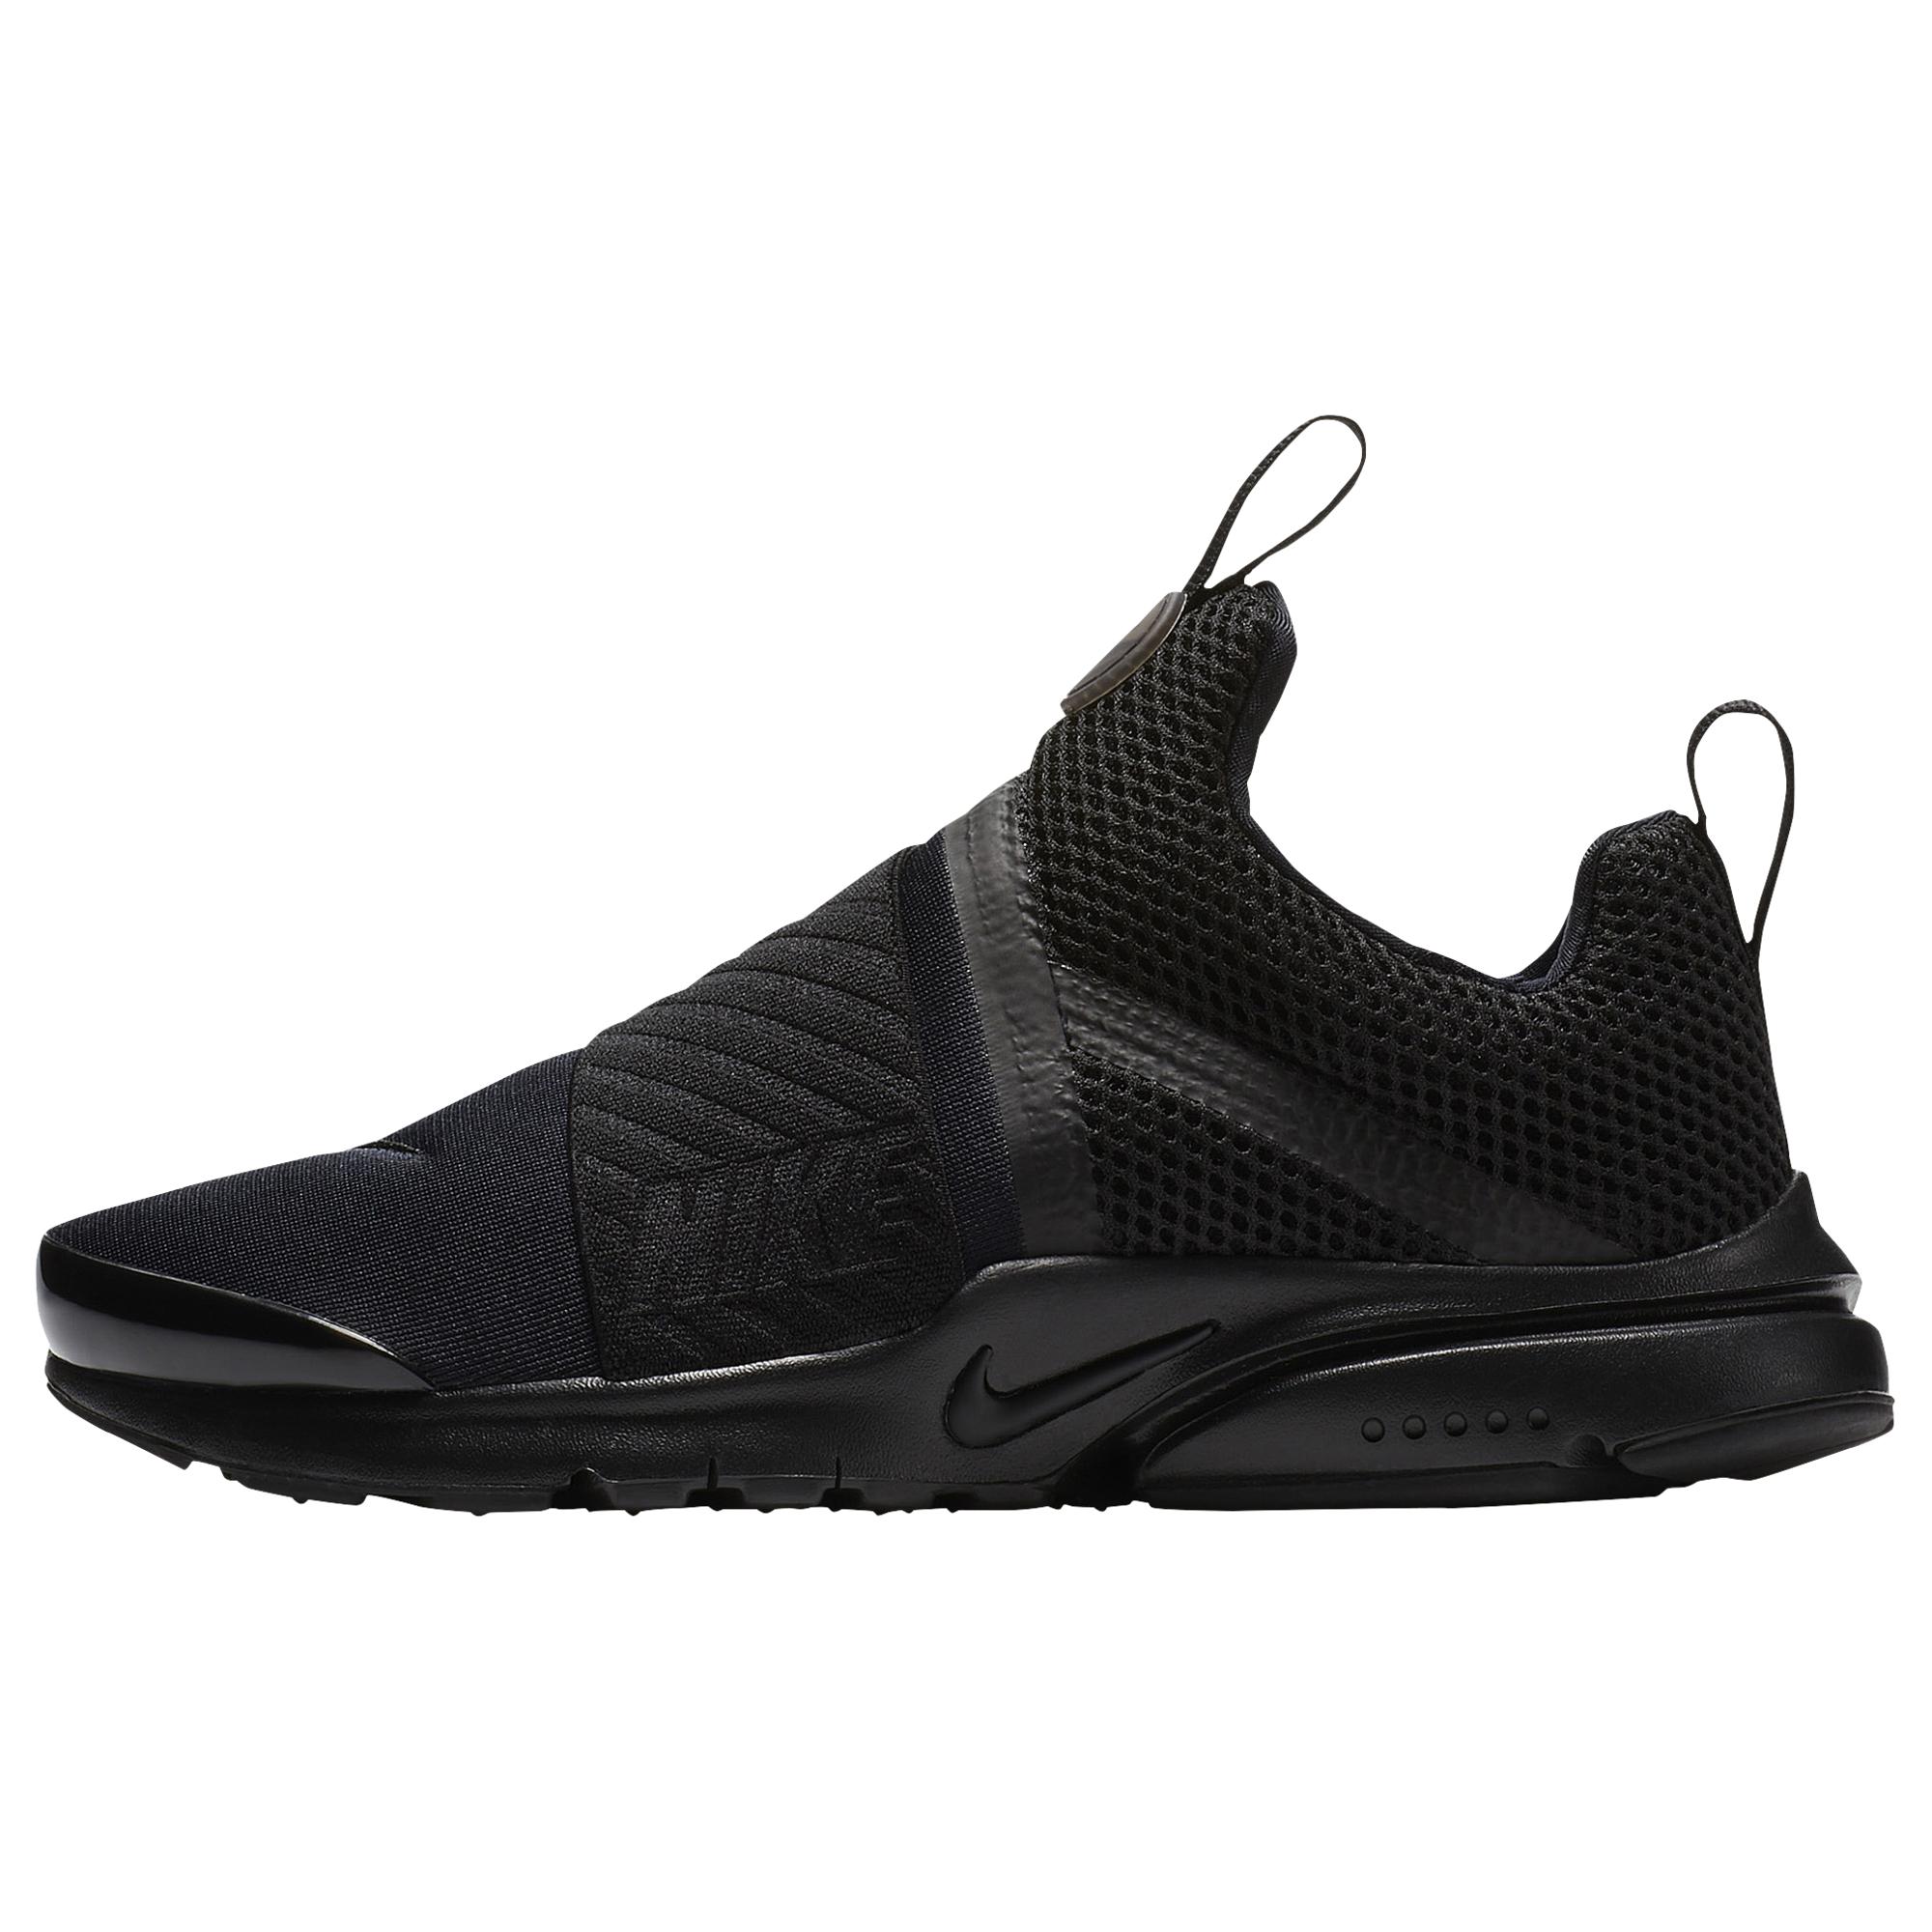 presto extreme running sneakers